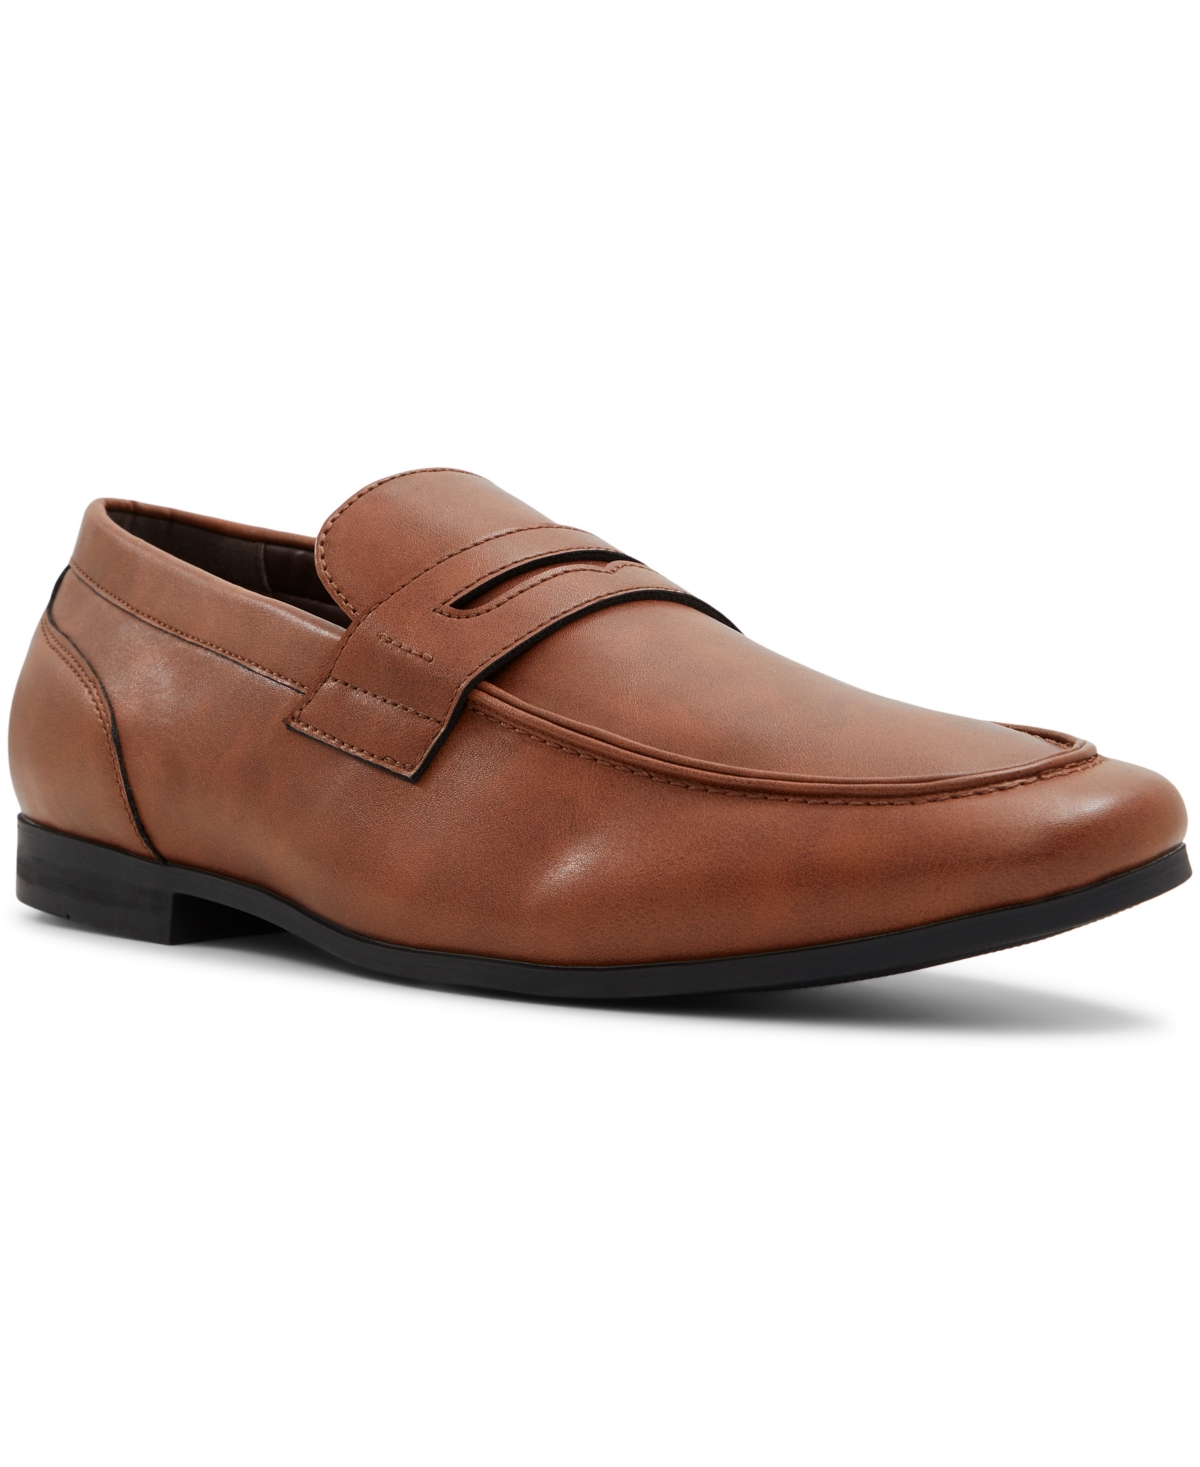 Men's Starling Driving Loafers - Tan